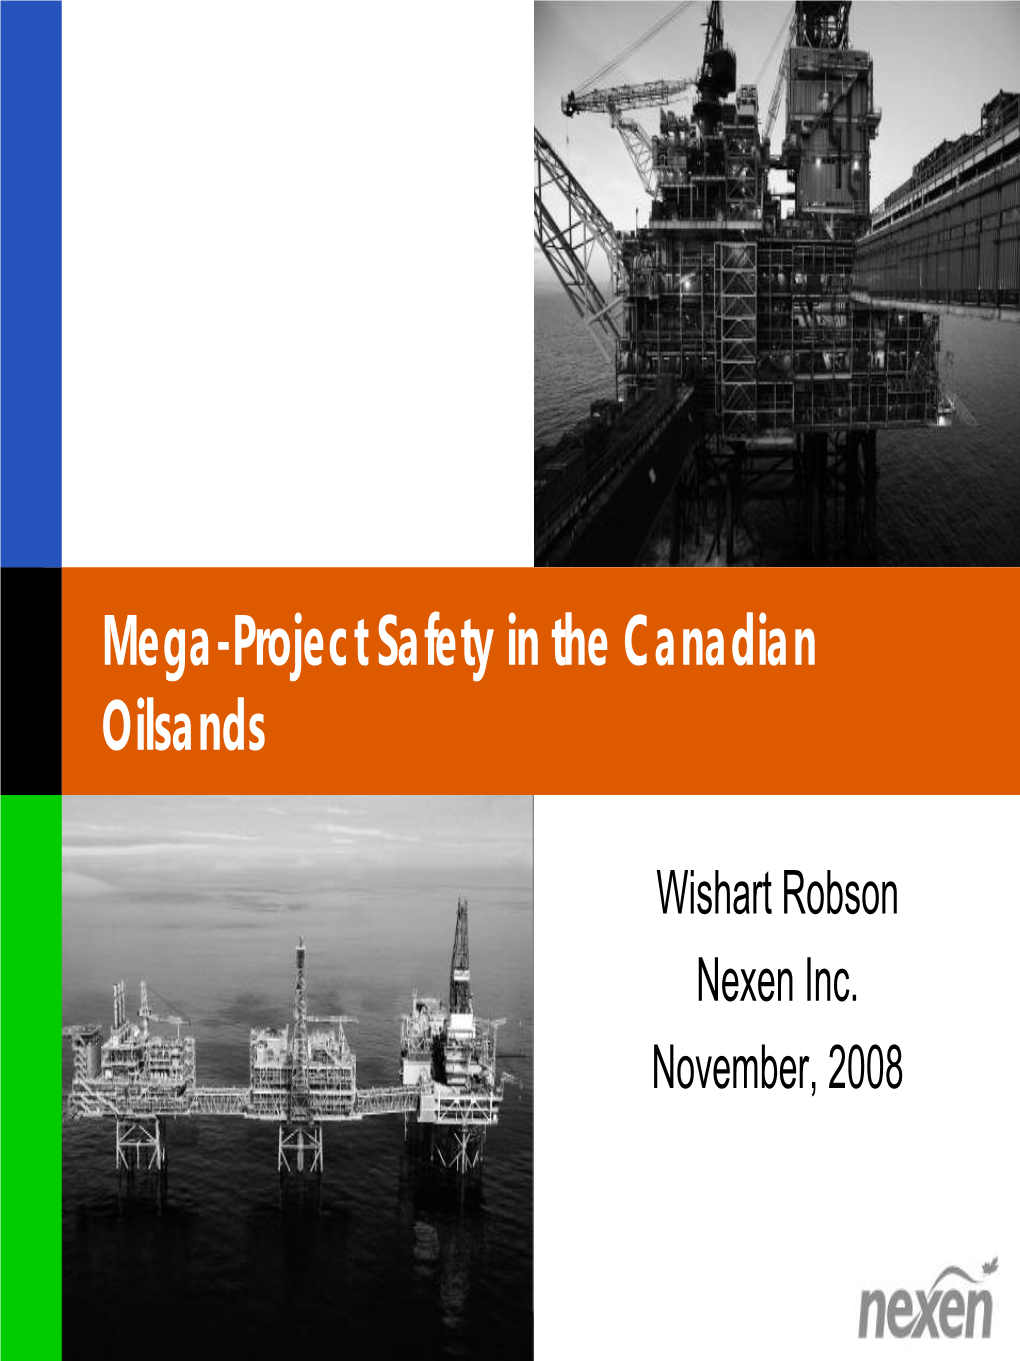 Mega-Project Safety in the Canadian Oilsands